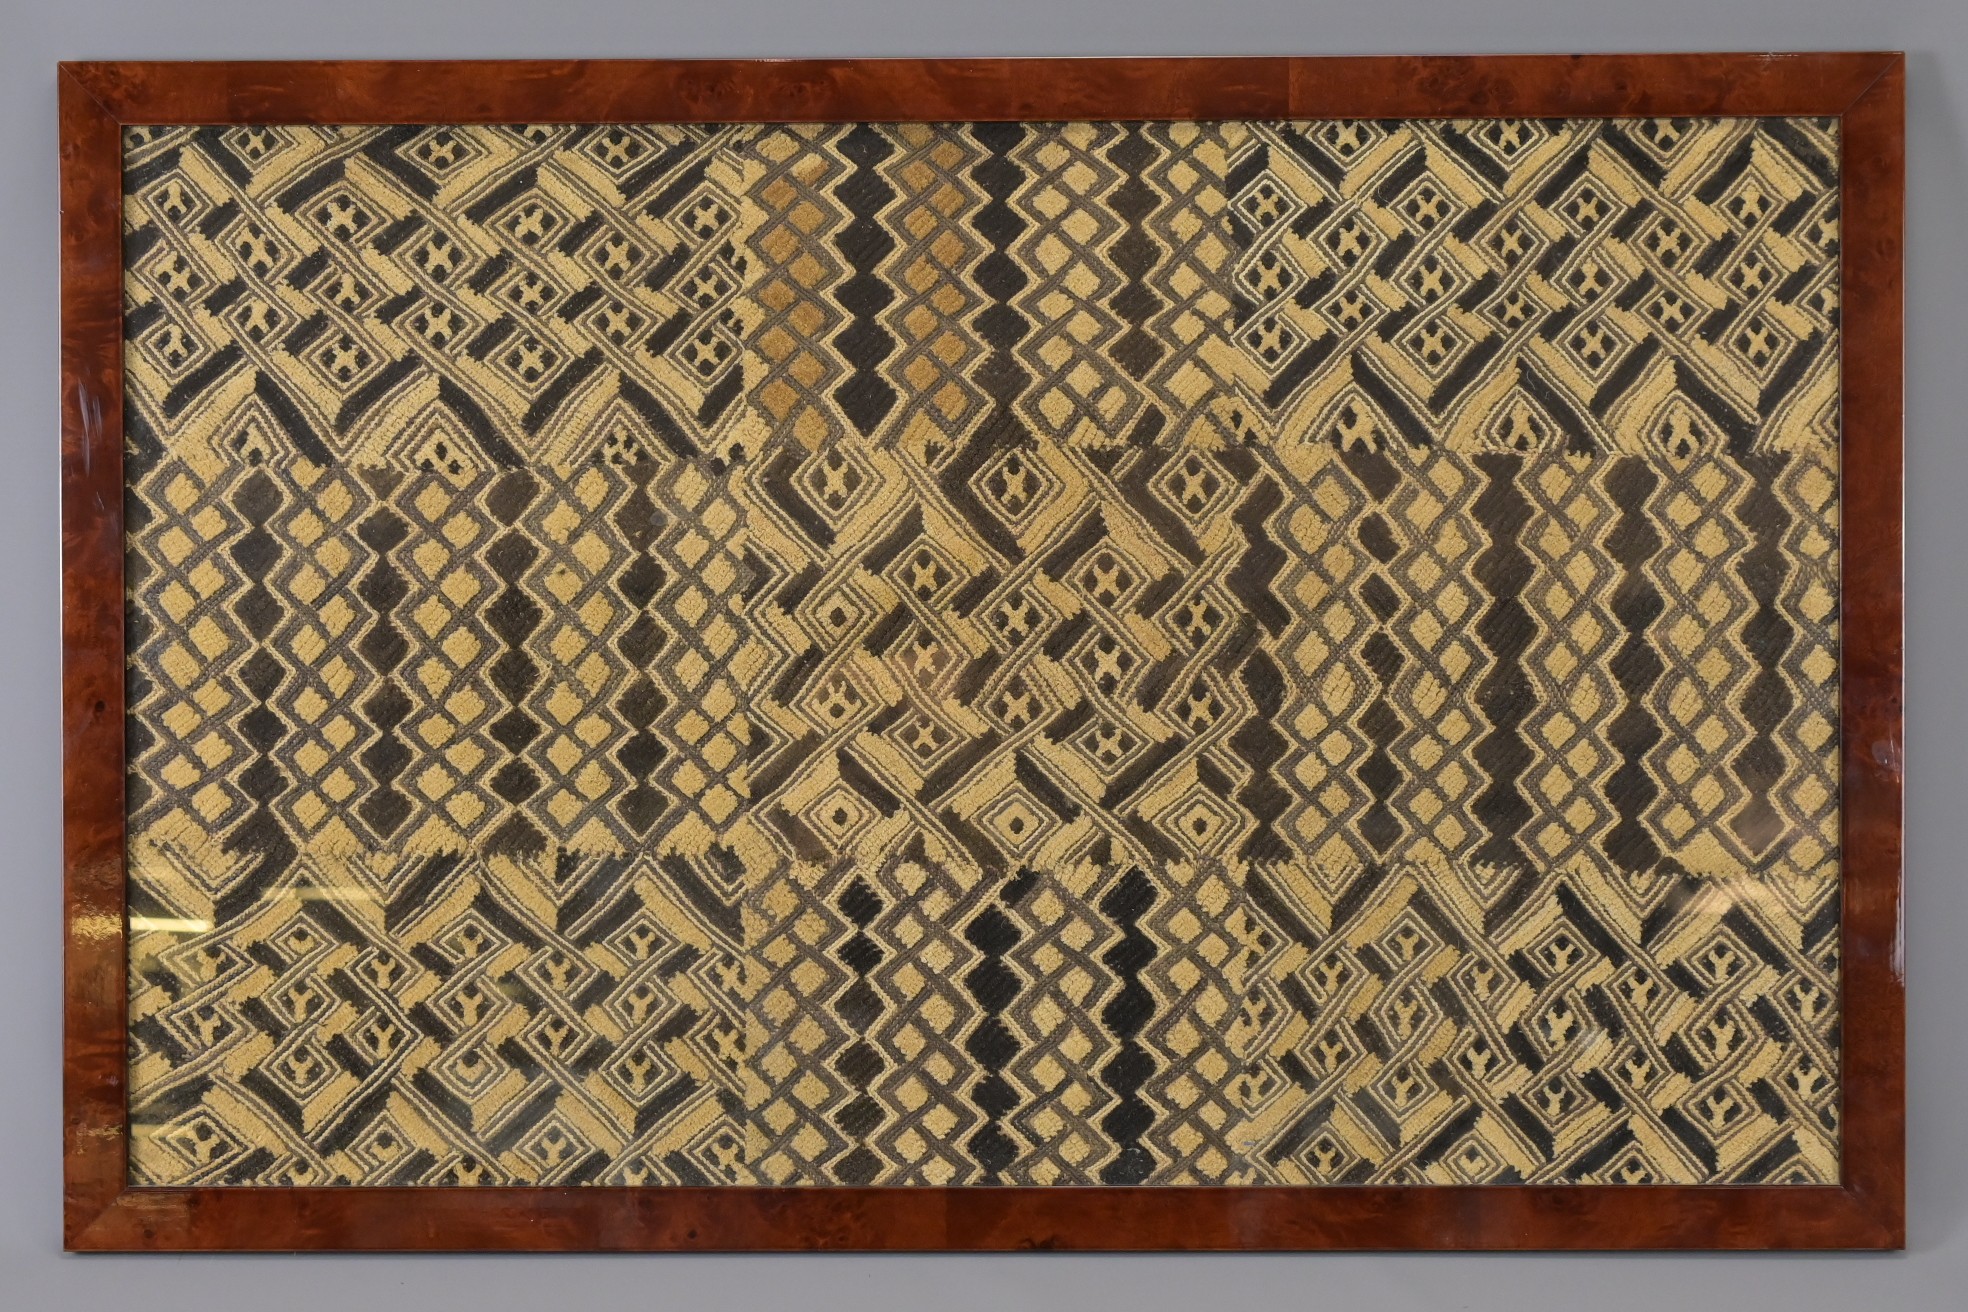 AN AFRICAN FRAMED EMBROIDERY, 20TH CENTURY, PERHAPS CONGOLESE. Woven with ivory and dark brown